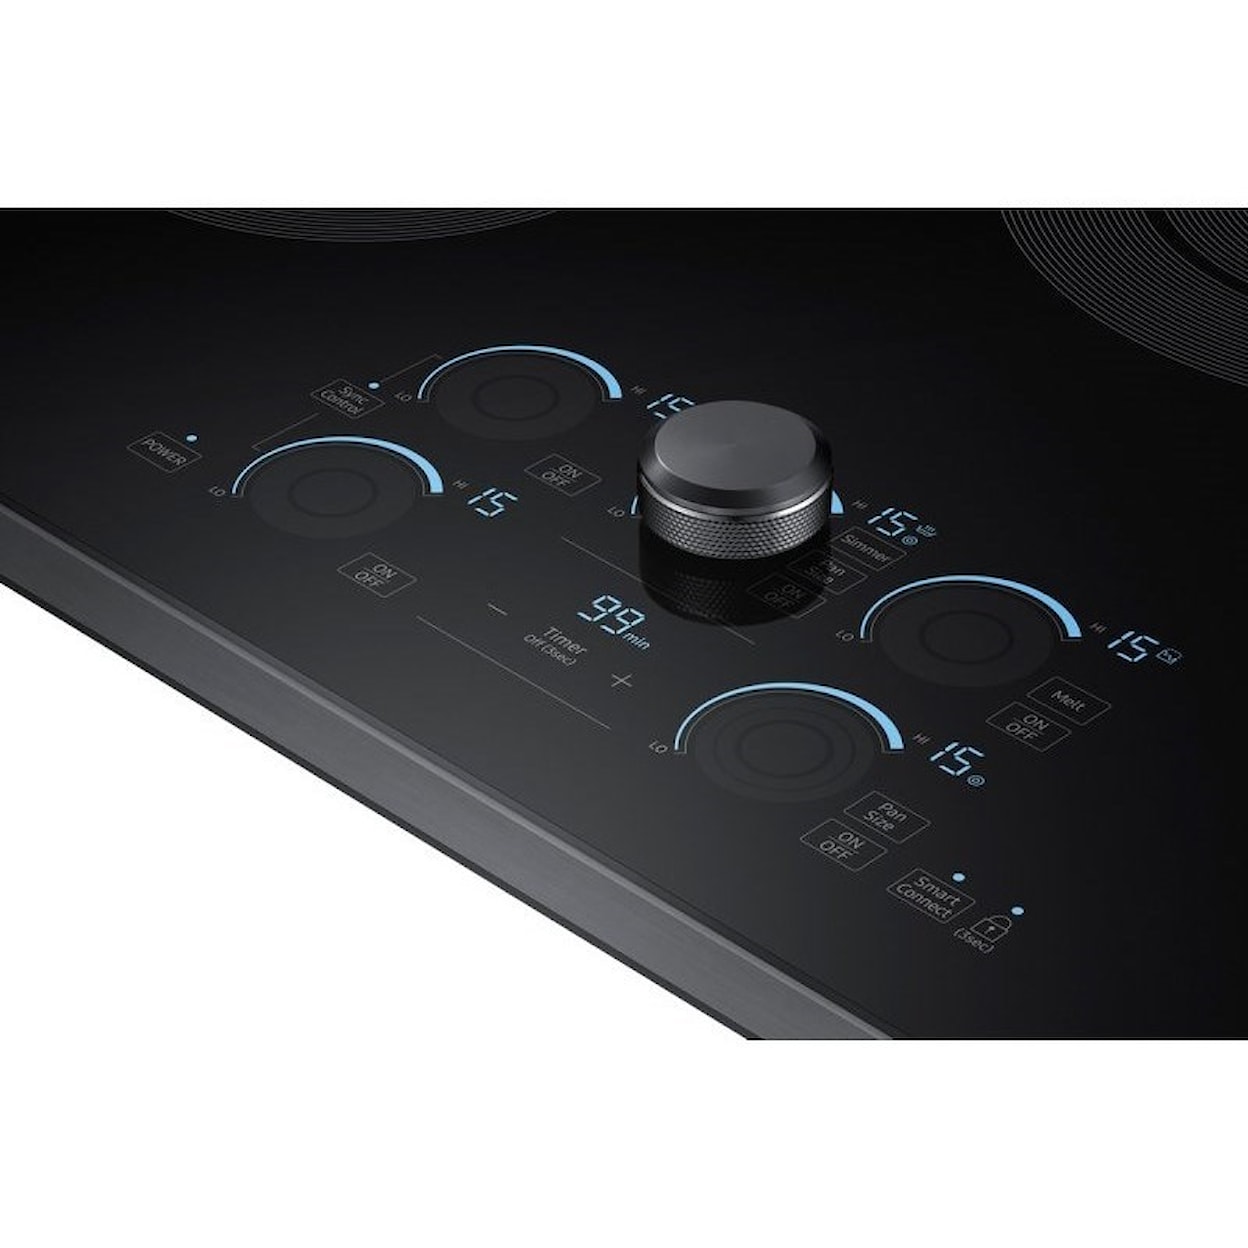 Samsung Appliances Electric Cooktops - Samsung 30" Electric Cooktop